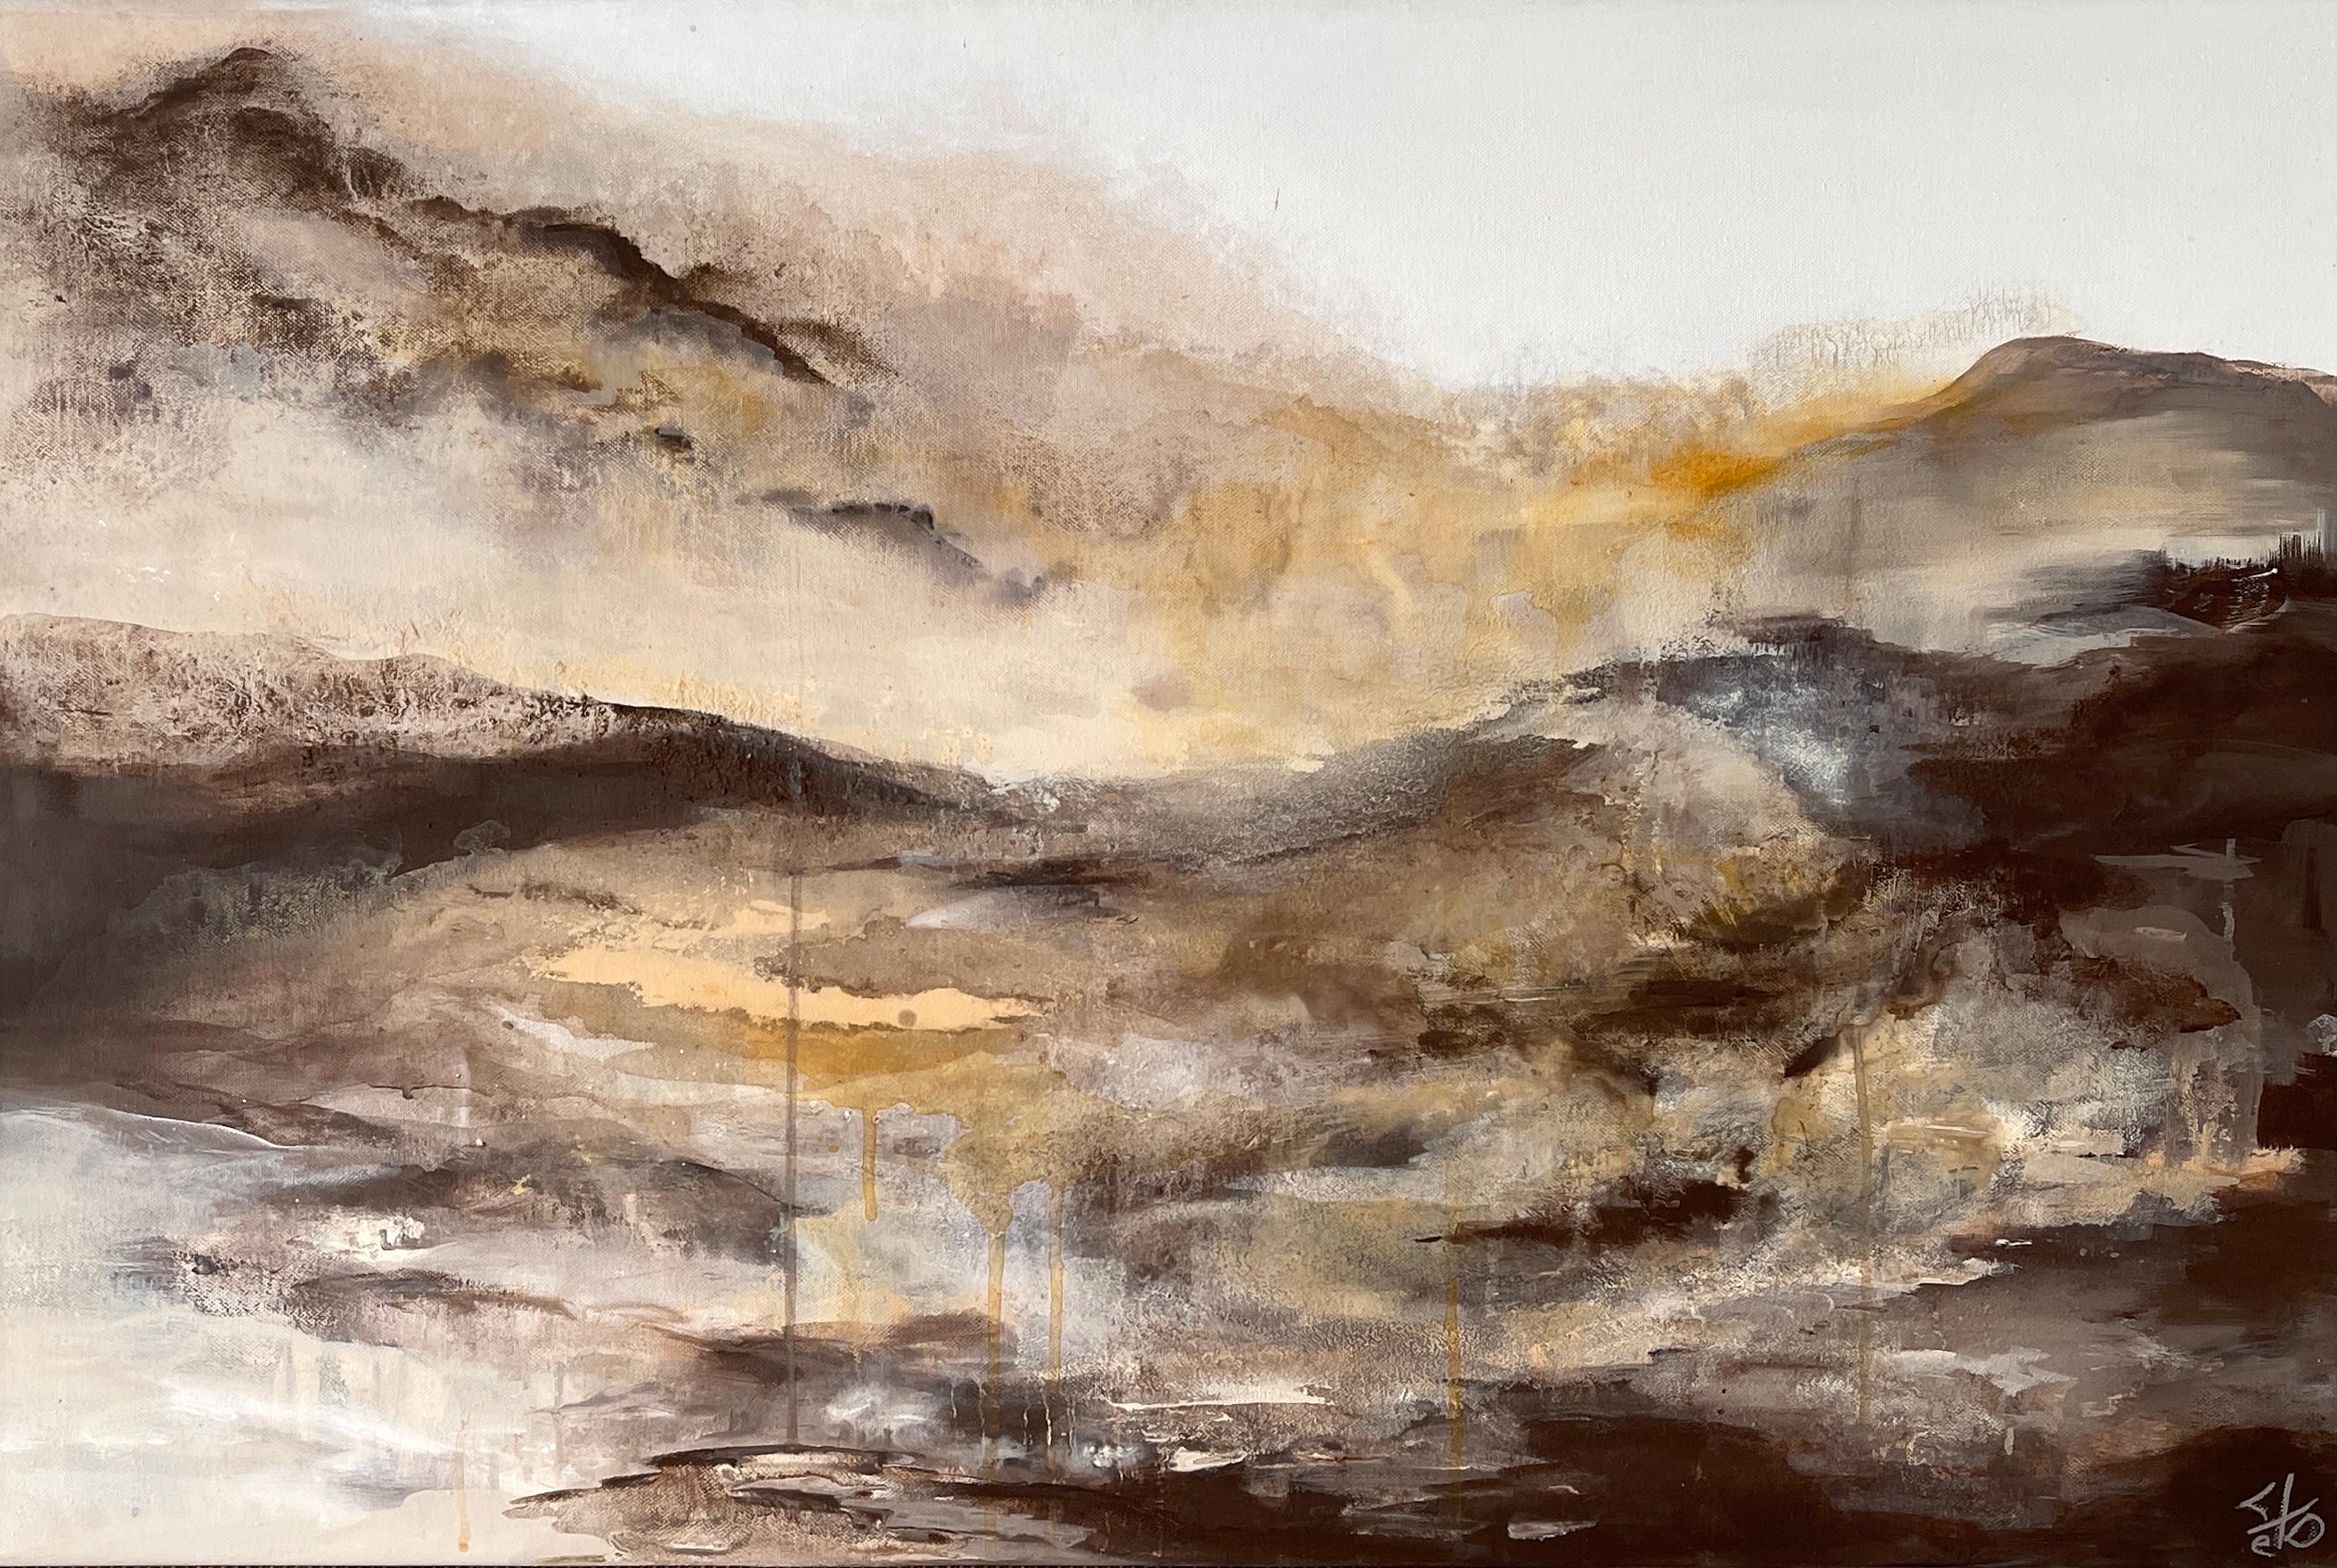 Lesia Danilina Abstract Painting - "After dark" desert landscape beige brown semi-abstract 